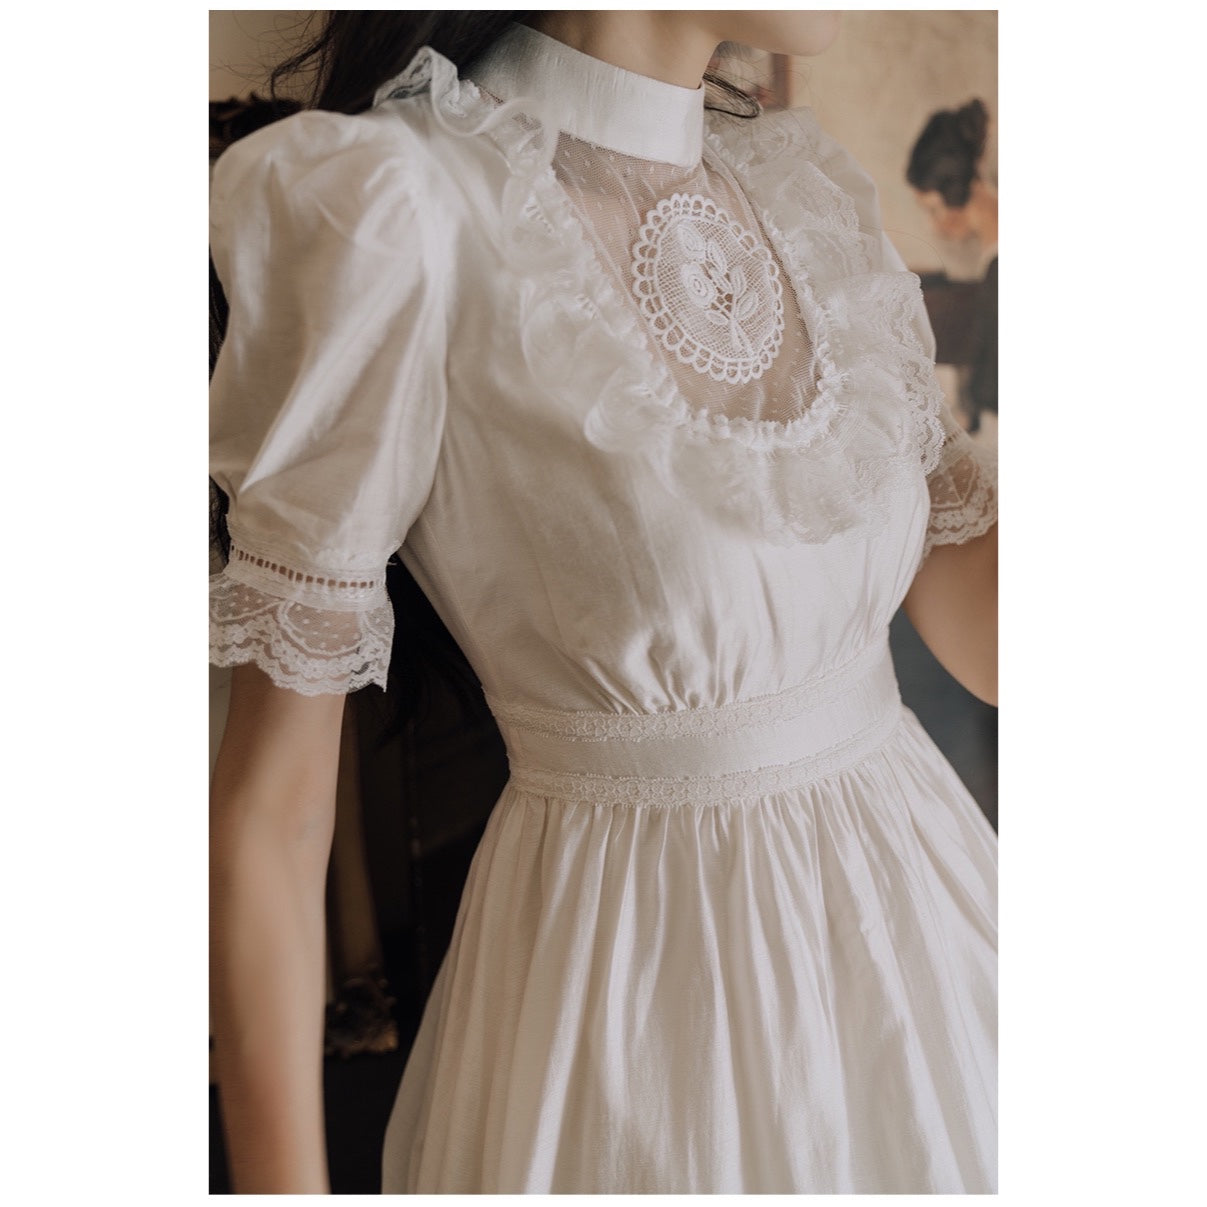 Chantelle Romantic Academia Flower Embroidered Vintage-style Dress 